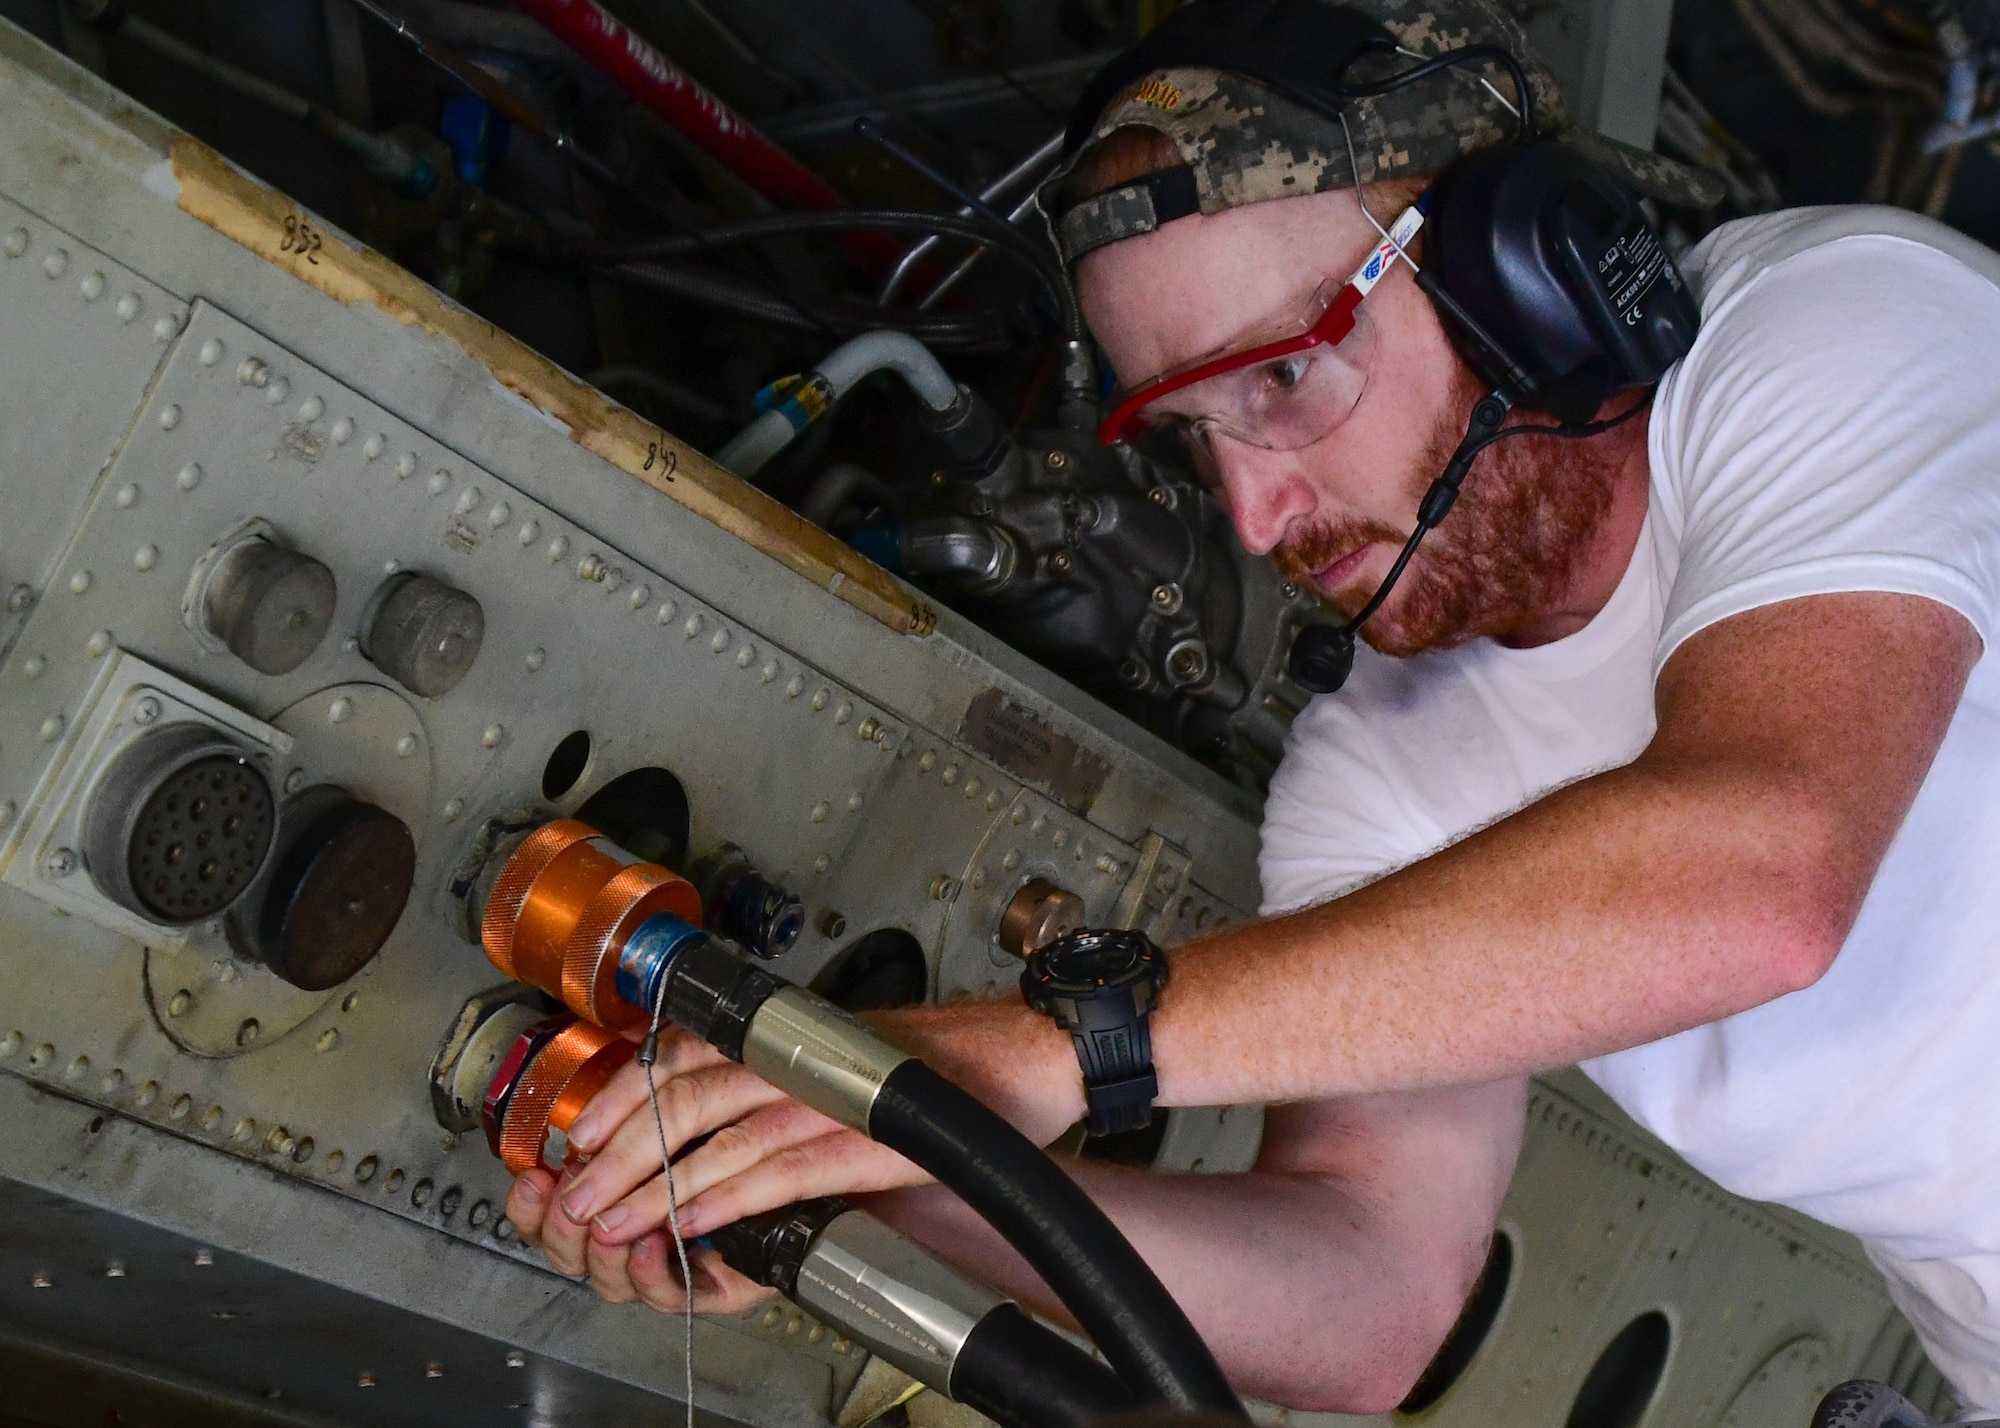 Staff Sgt. Brian Vermillion, assigned to the 307th Maintenance Squadron, attaches hydraulic tester to the hydraulic system inside the bomb bay of a B-52 Stratofortress during a phase inspection on Barksdale Air Force Base, La. June 28, 2017. The testing of the hydraulic system is part of the phase inspection of the B-52 that must be performed every 450 flight hours. (U.S. Air Force photo by Master Sgt. Dachelle Melville/Released)